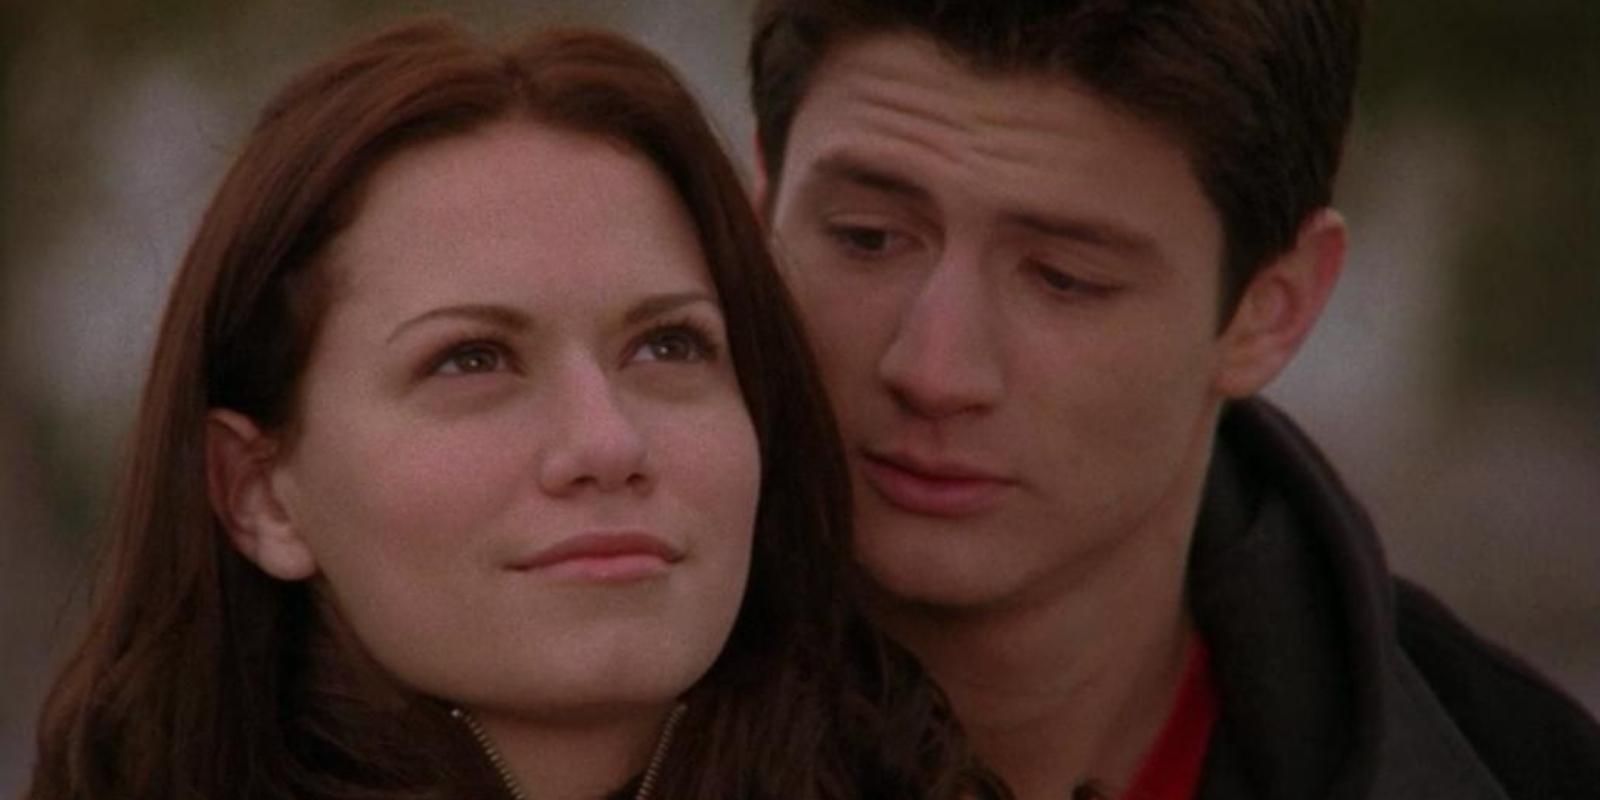 Haley James and Nathan Scott on the basketball court in One Tree Hill